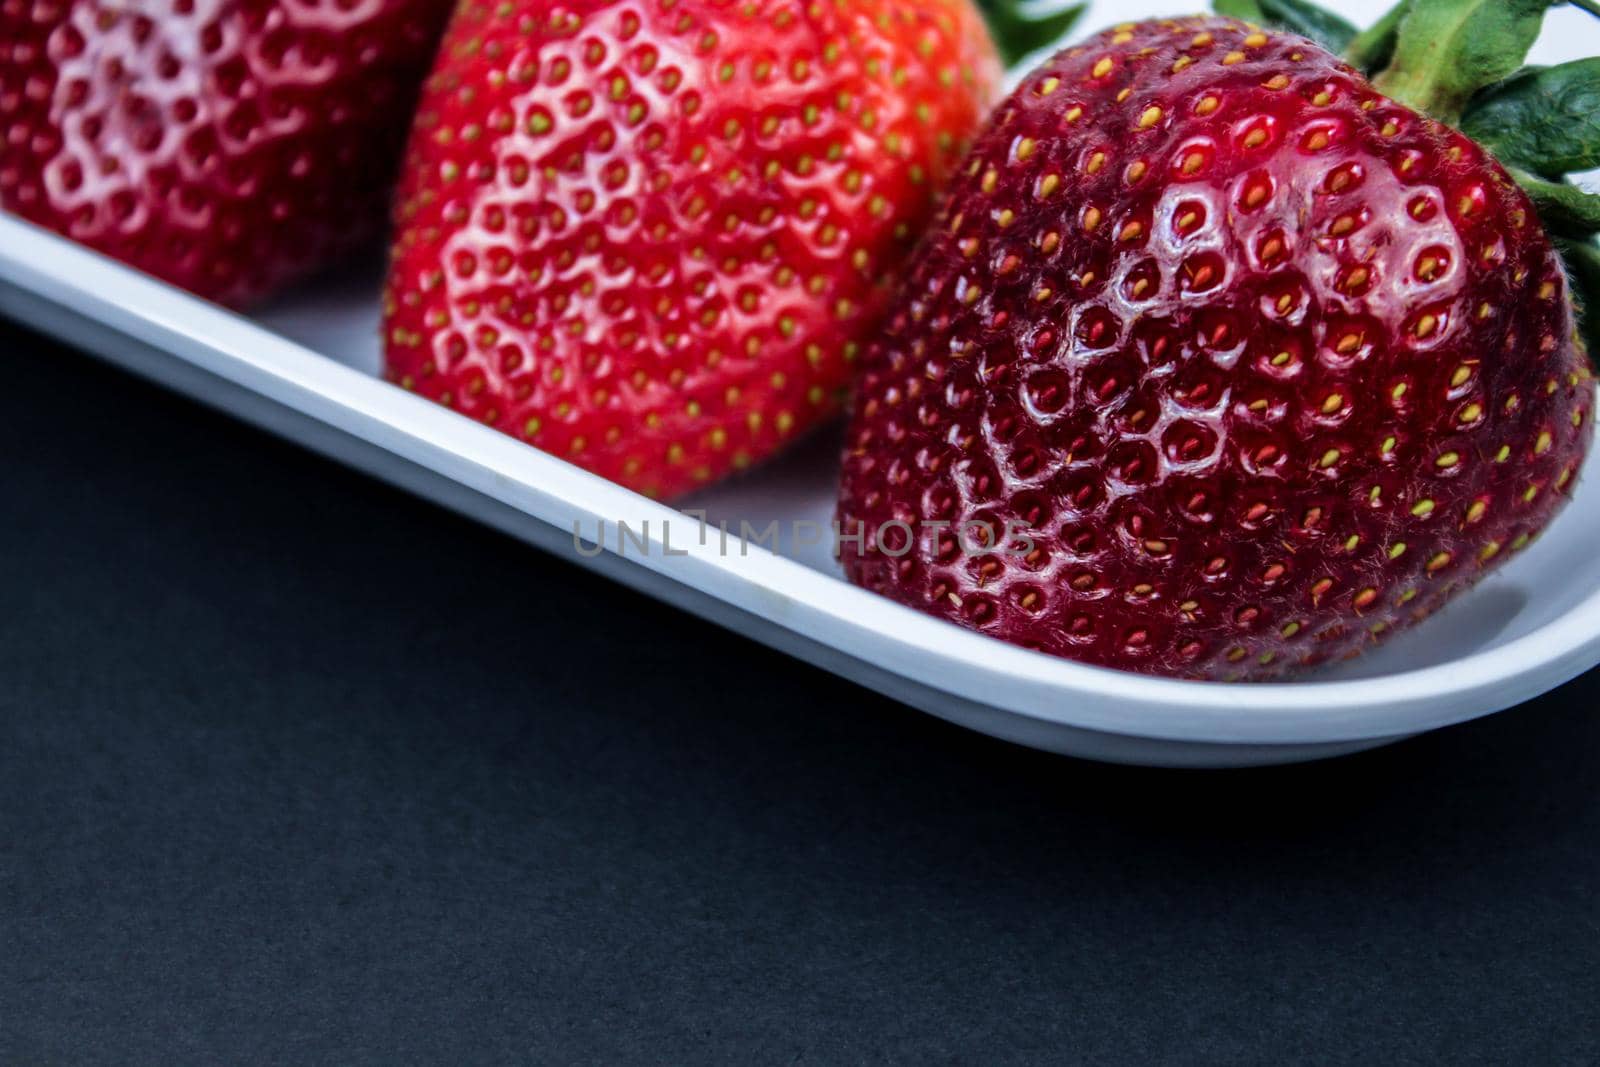 Strawberry in a white plate close up on a black background. Fresh red strawberry in white bowl on black background. side view, copy space, close up.